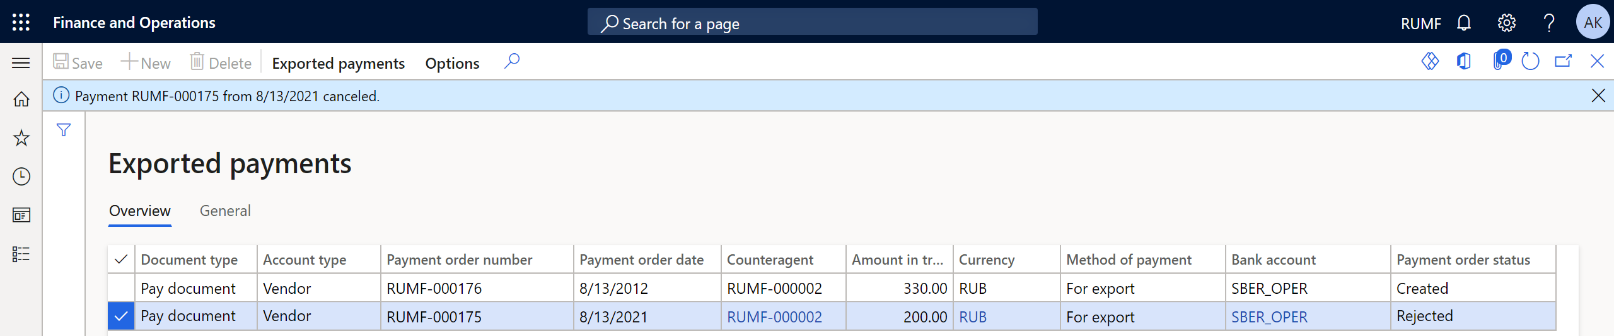 Exported payments on the Overview tab of the Exported payments page.